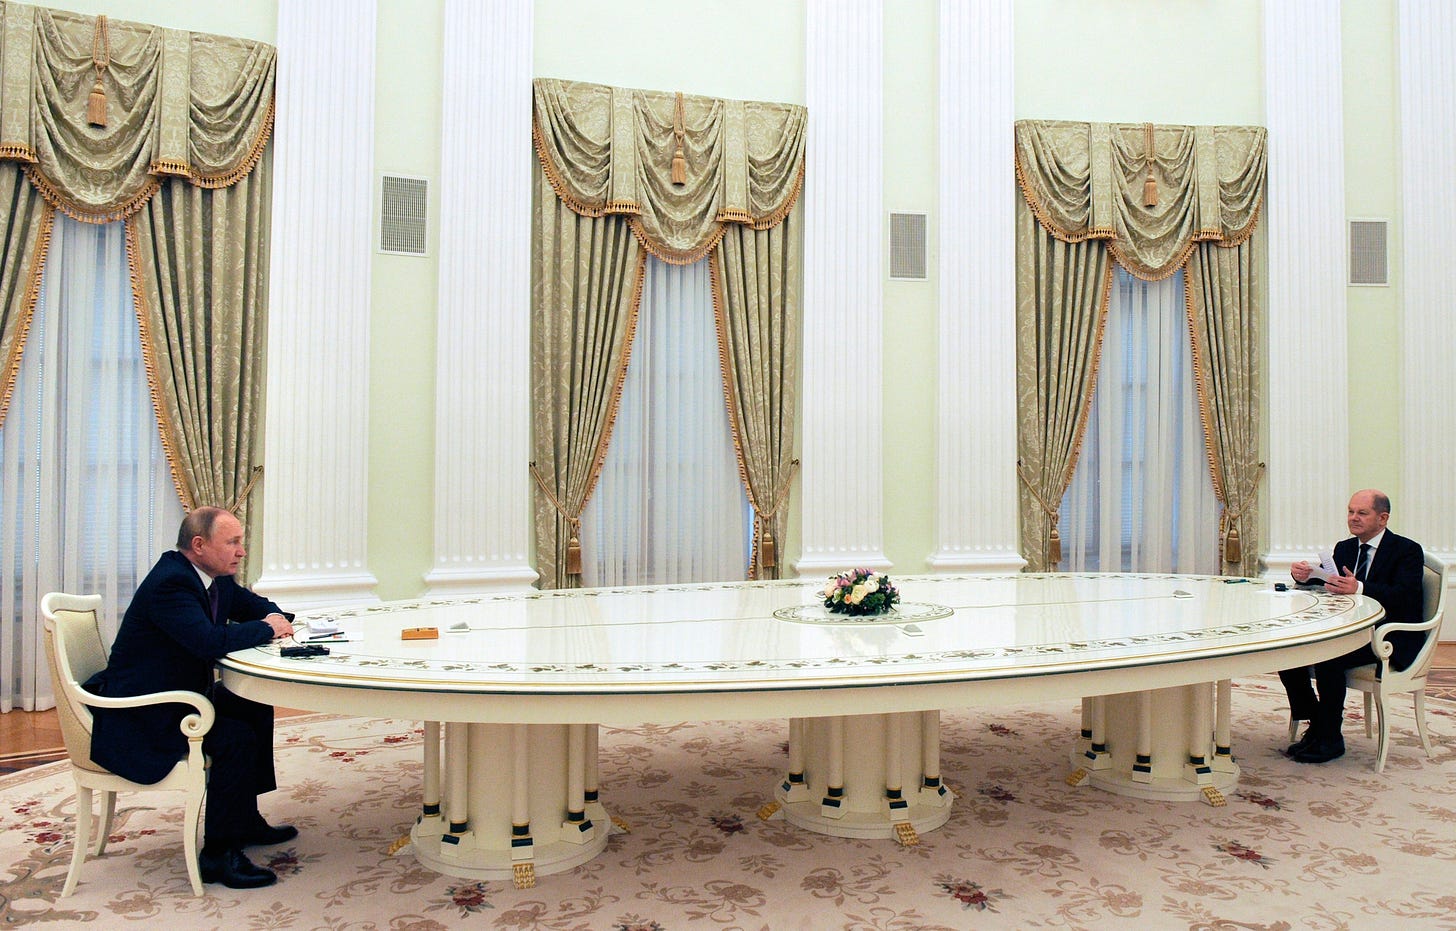 What Vladimir Putin's long table tells us about Russia's inner workings